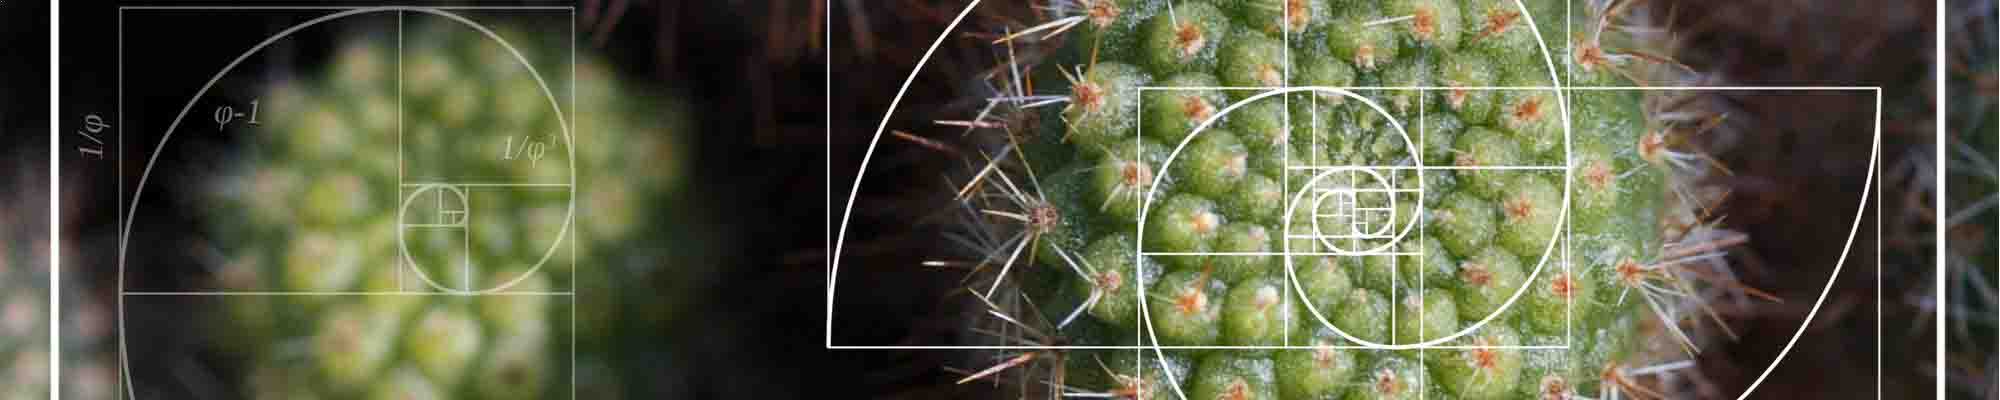 A representation of fractals in nature, in this case, a cactus